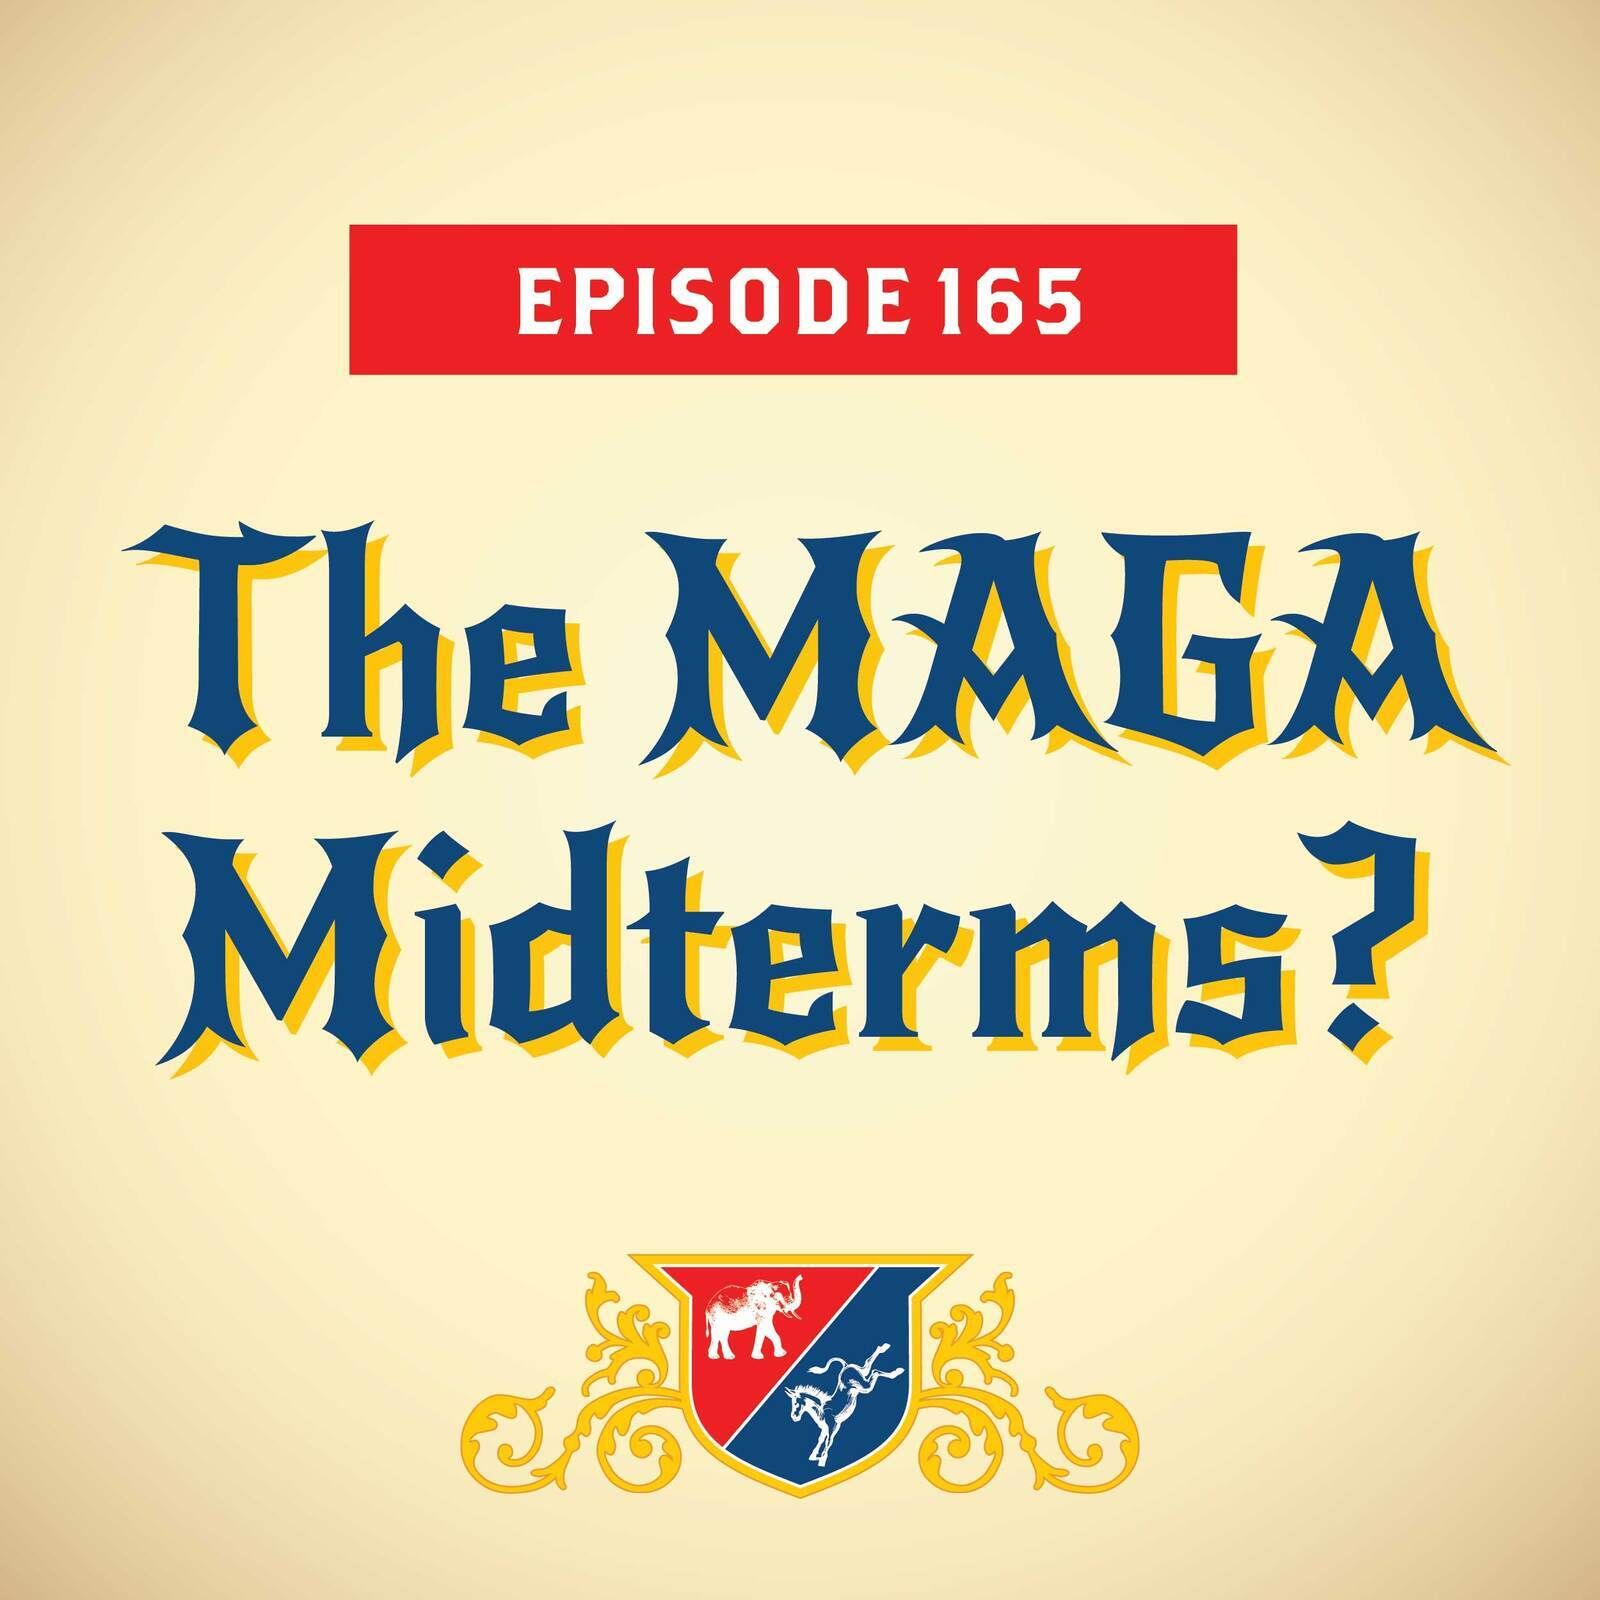 The MAGA Midterms?